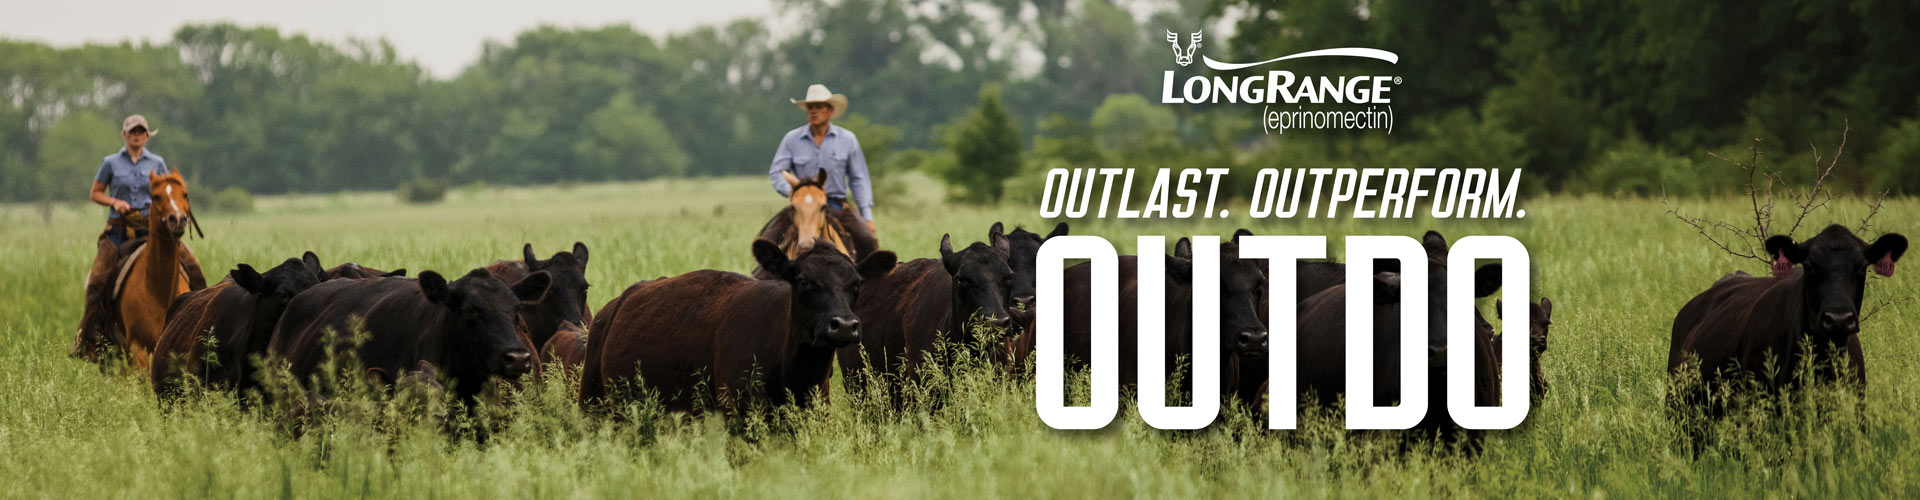 Image of cows in a field with a man on horse back in the middle. Text reads, Outlast, outperform, Outdo